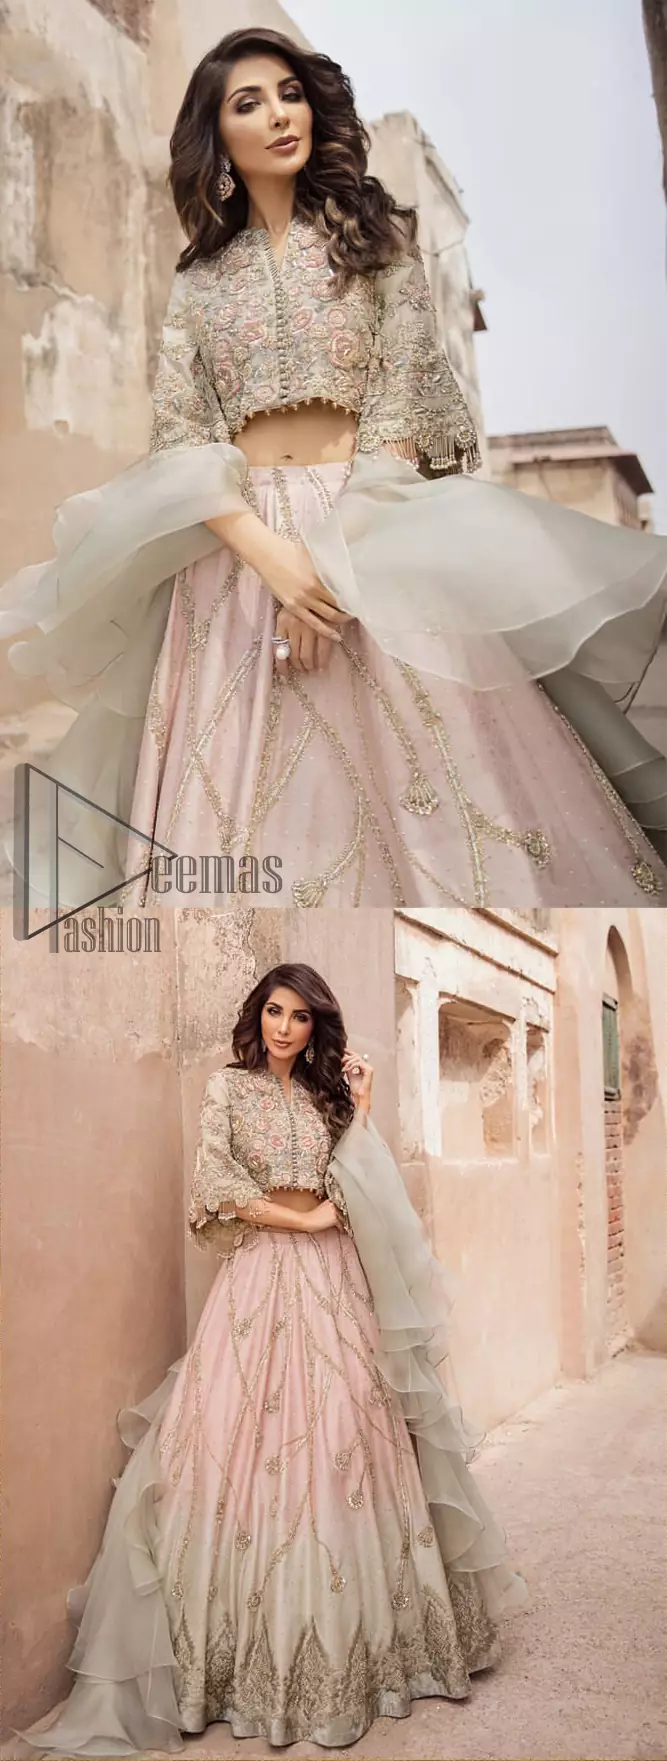 This artisanal piece is rendered in grace and timelessness. An example of beauty and elegance. Look breathtakingly stylish in this embroidered regalia furnished with intricate embroidered blouse and scalp third quarter bell sleeves. It comprises with gradient lehenga having light pink and mint green colors done with zardozi floral bootis and a thick embellished bottom. Style it up with mint green organza dupatta.
